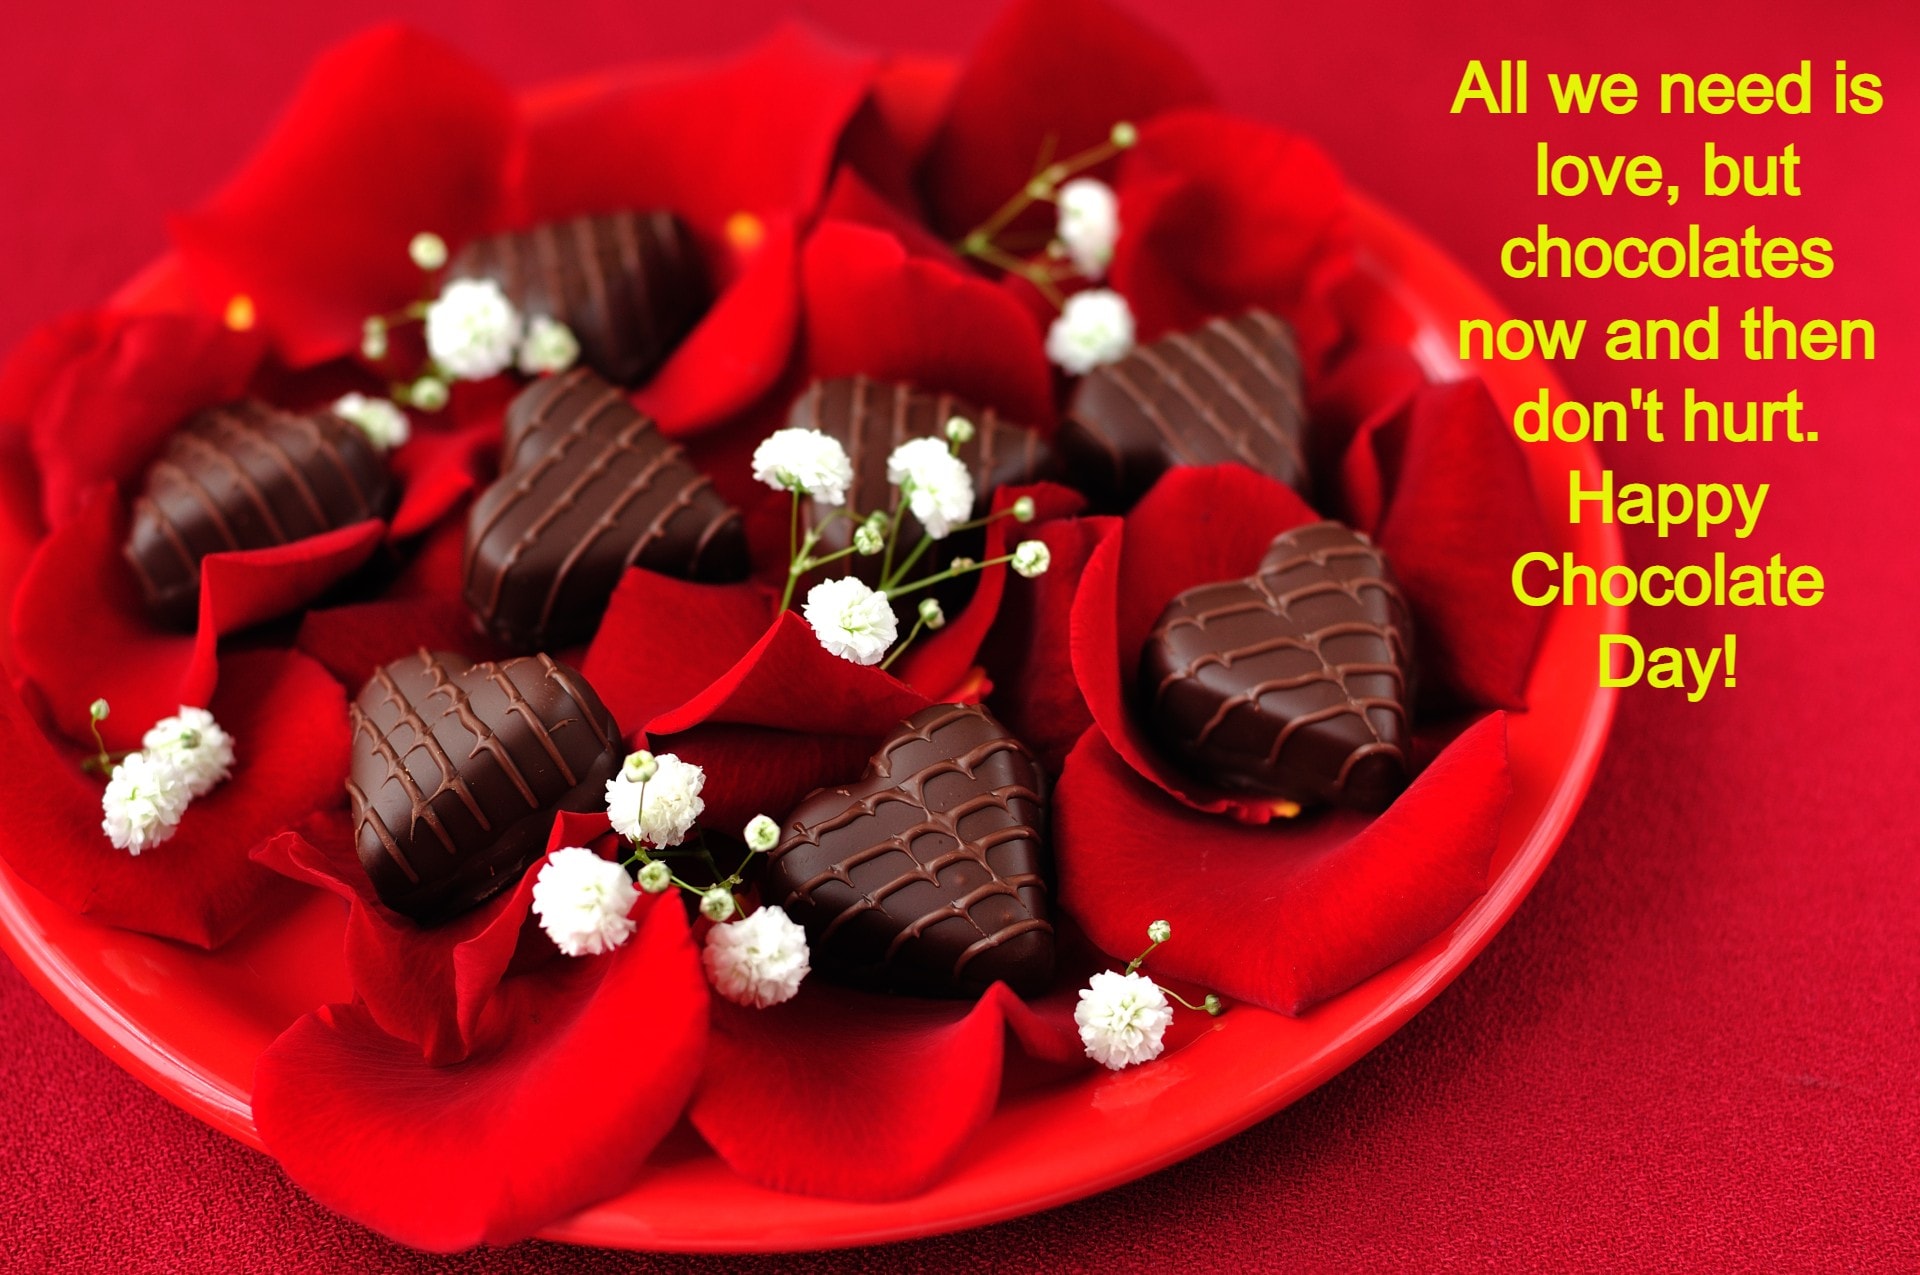 Happy Chocolate Day 2022: Wishes Images, Wallpaper, Quotes, Status, Photos, Pics, SMS, Messages. (Image: Shutterstock)